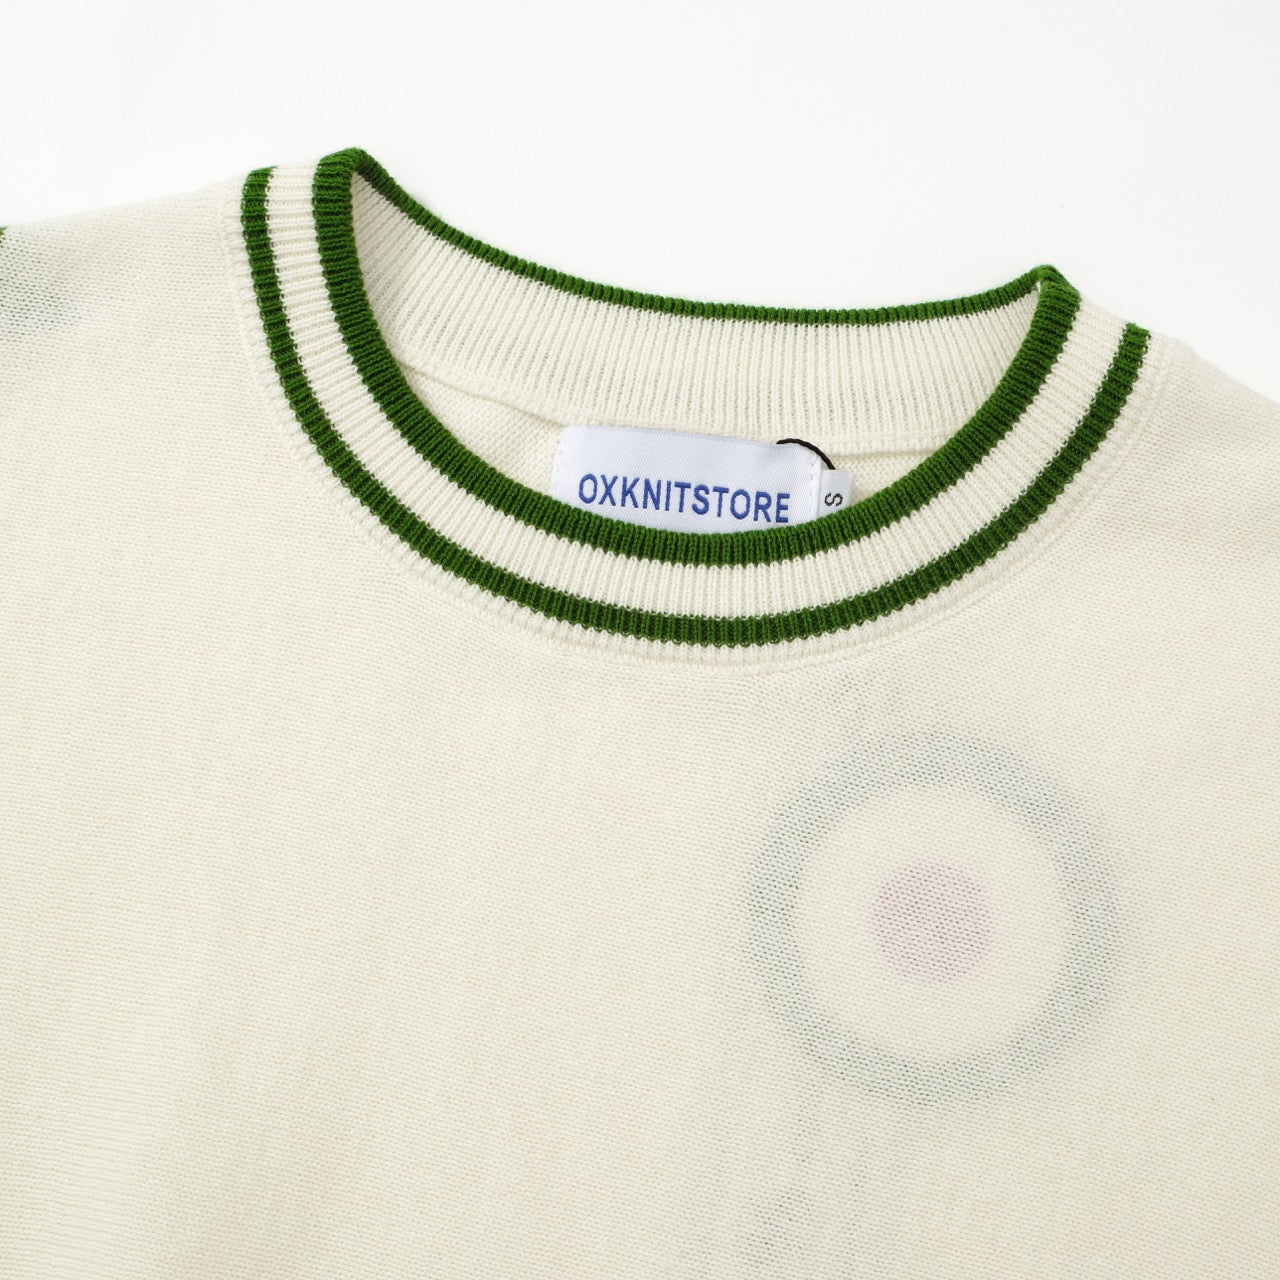 OXKNIT Men Vintage Clothing 1970s Mod Style Casual Green Racing Stripe Knit Retro Tee